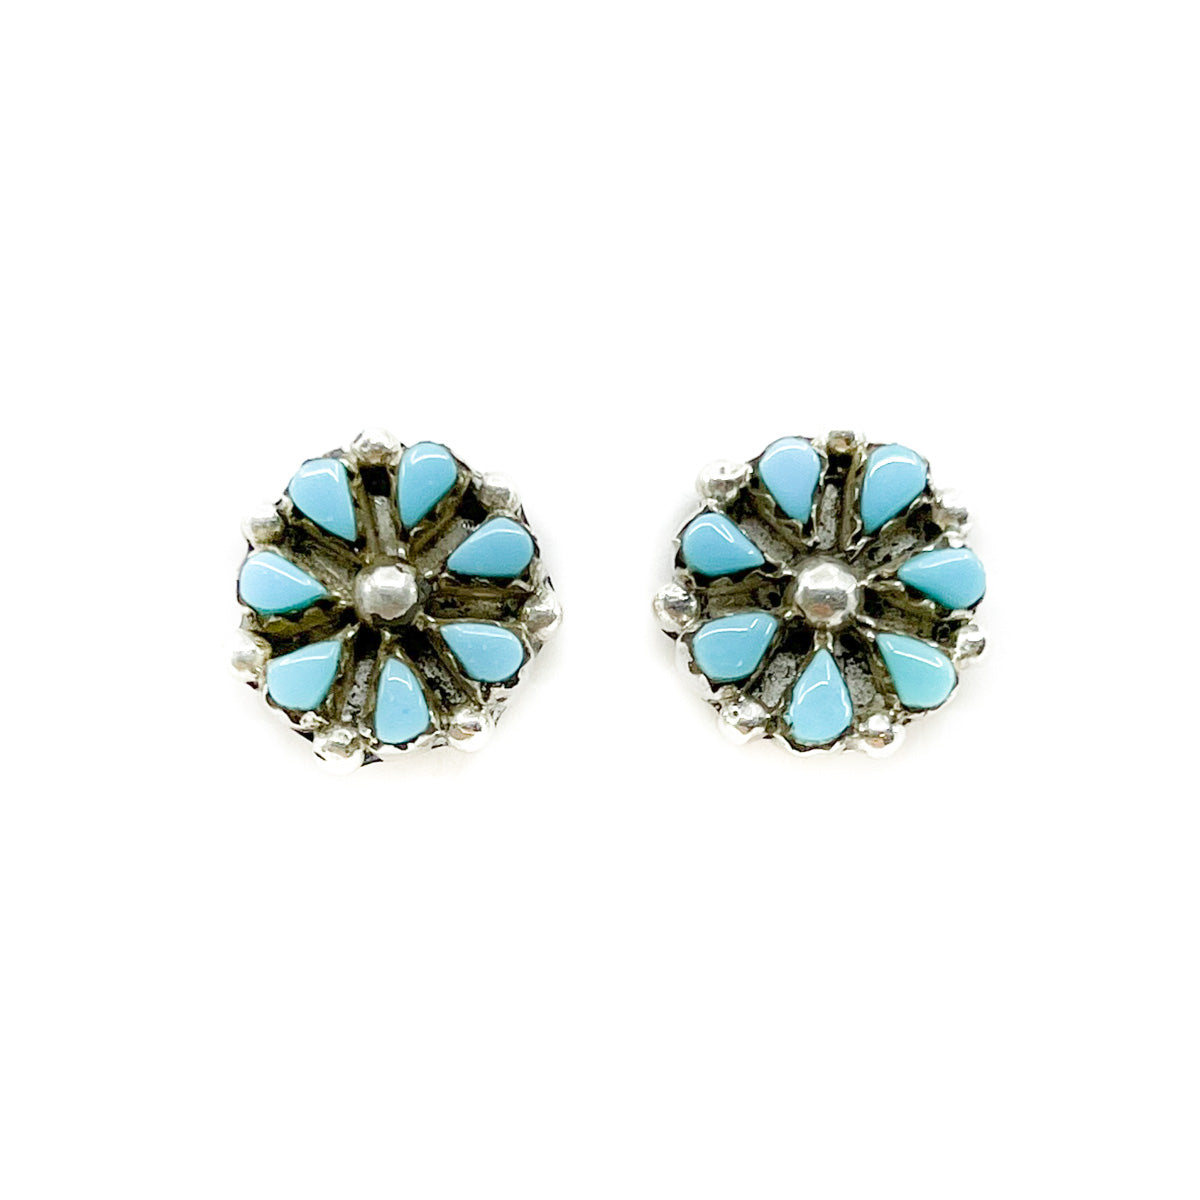 Silver & Turquoise Blossom Stud Earrings